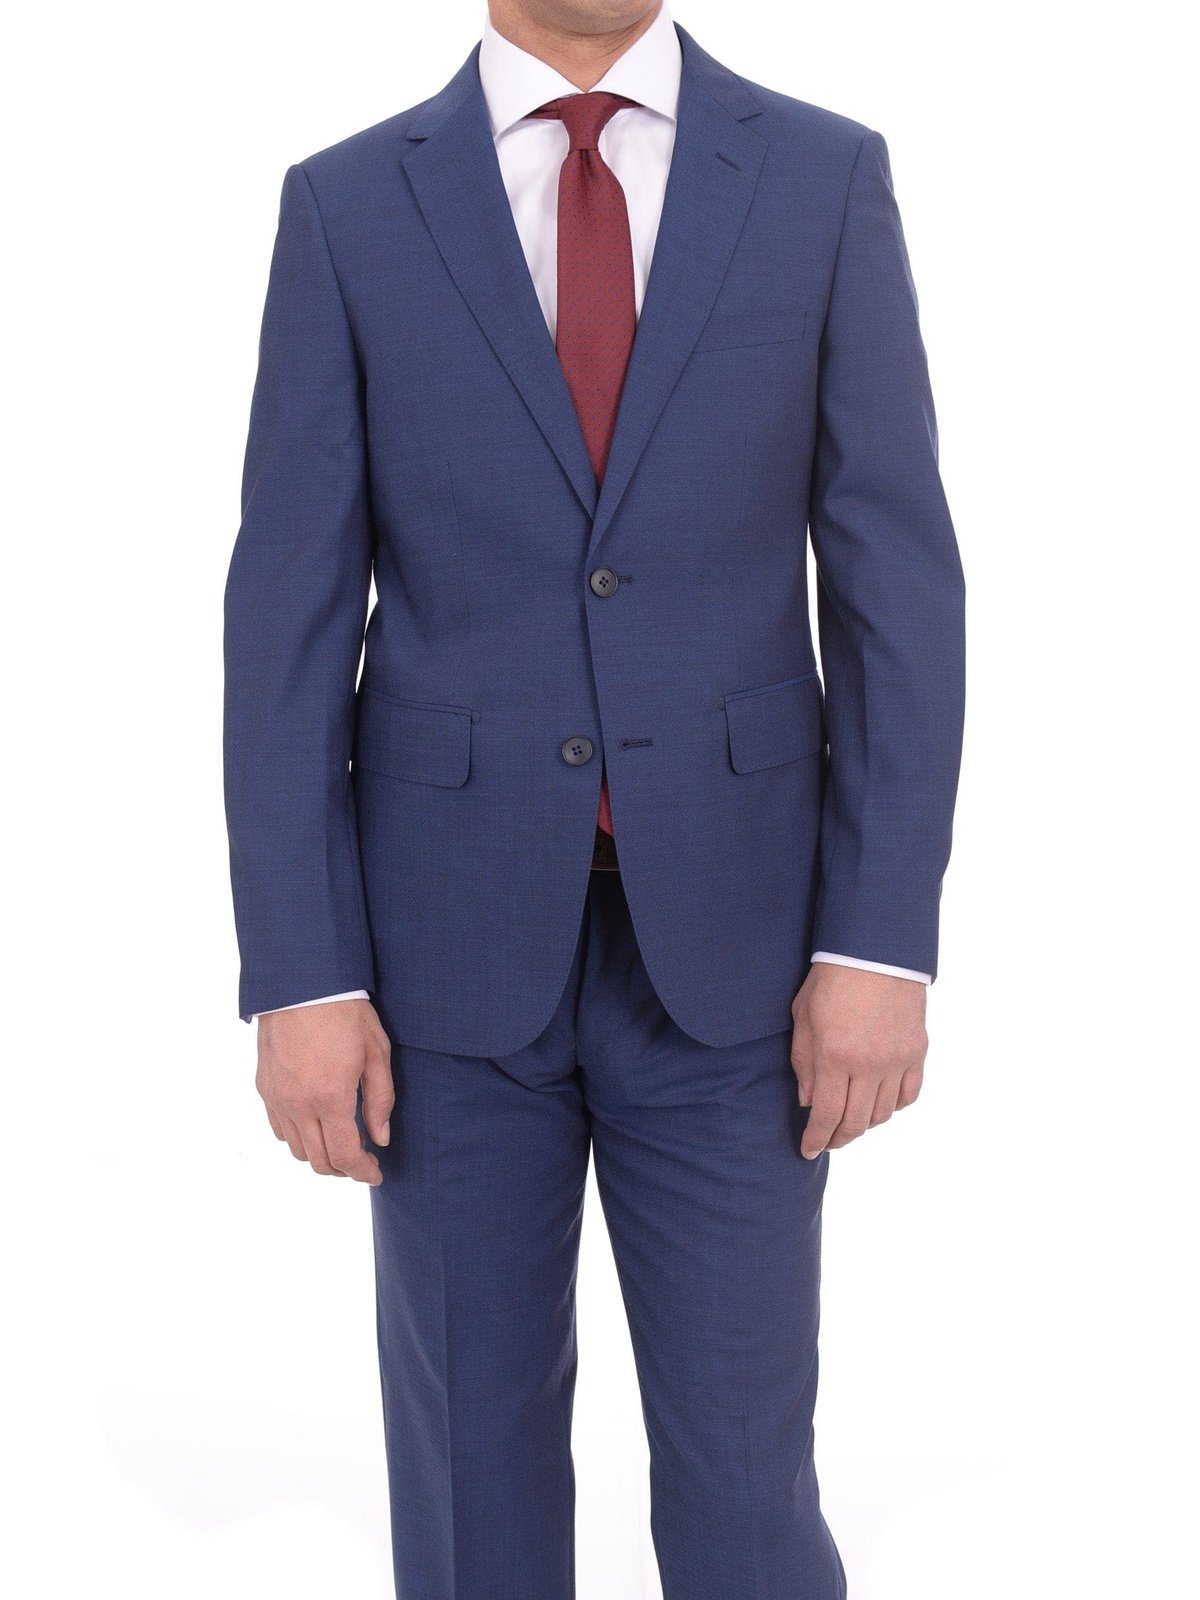 London Fog TWO PIECE SUITS Extra Slim Fit Mens Blue Textured Two Button Wool Suit With Pick Stitching